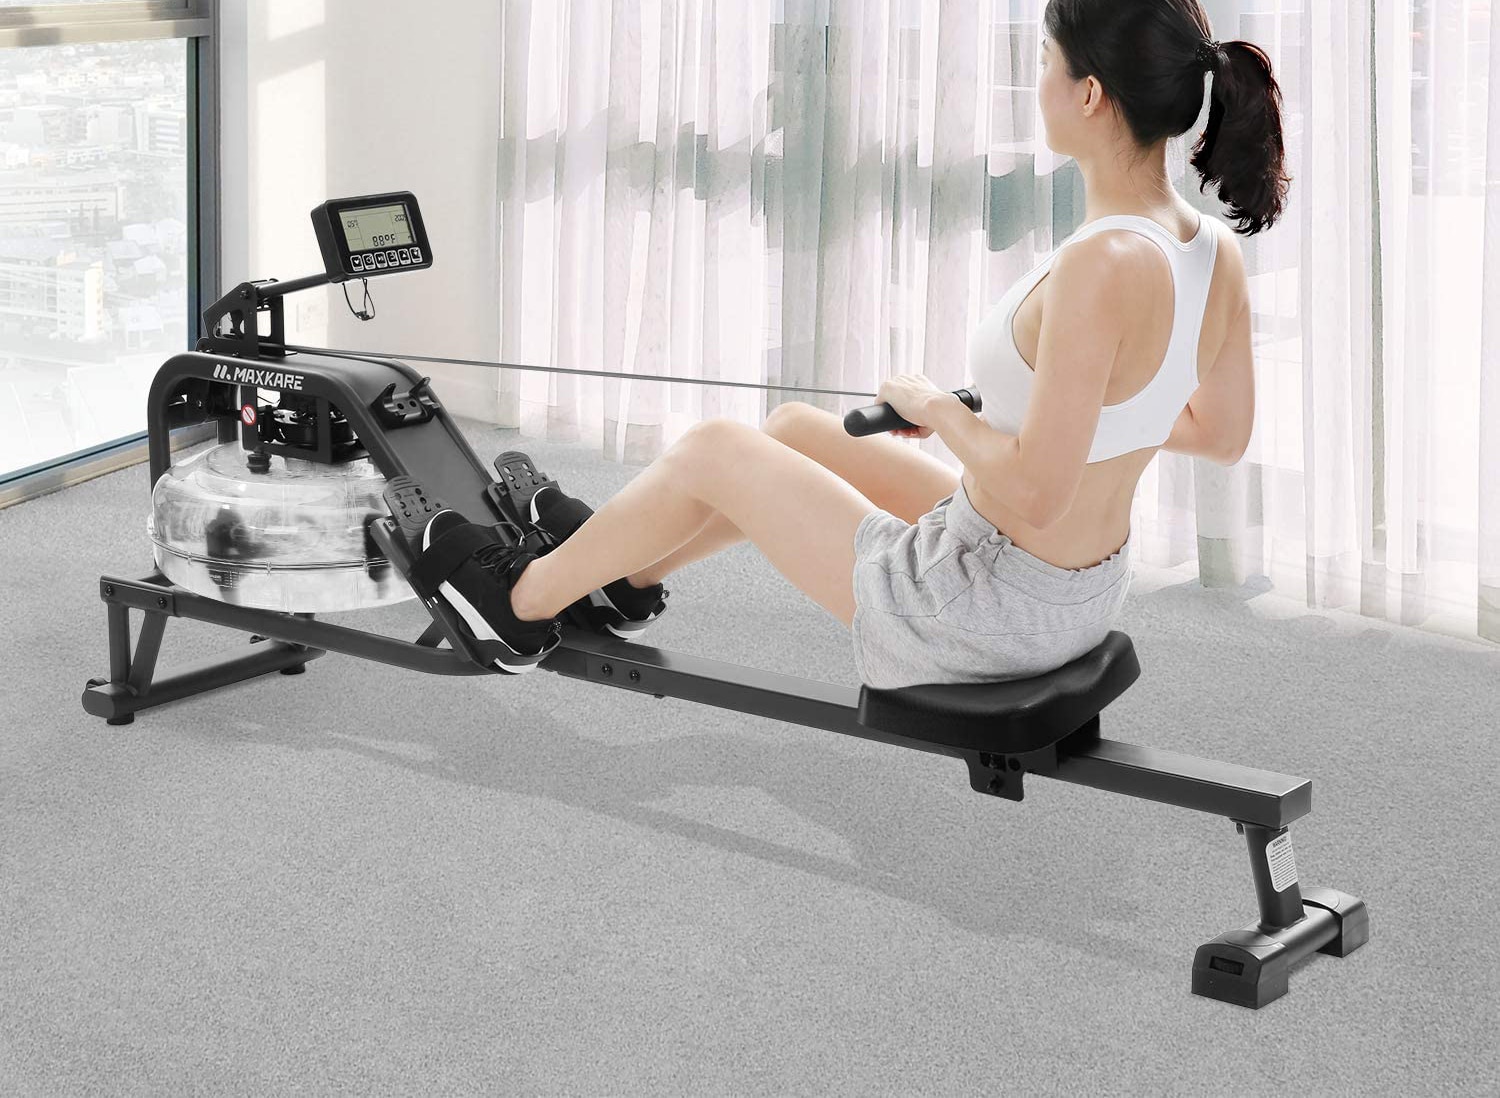 Top 10 Best Rowing Machine For Sale In 2020 Reviews 